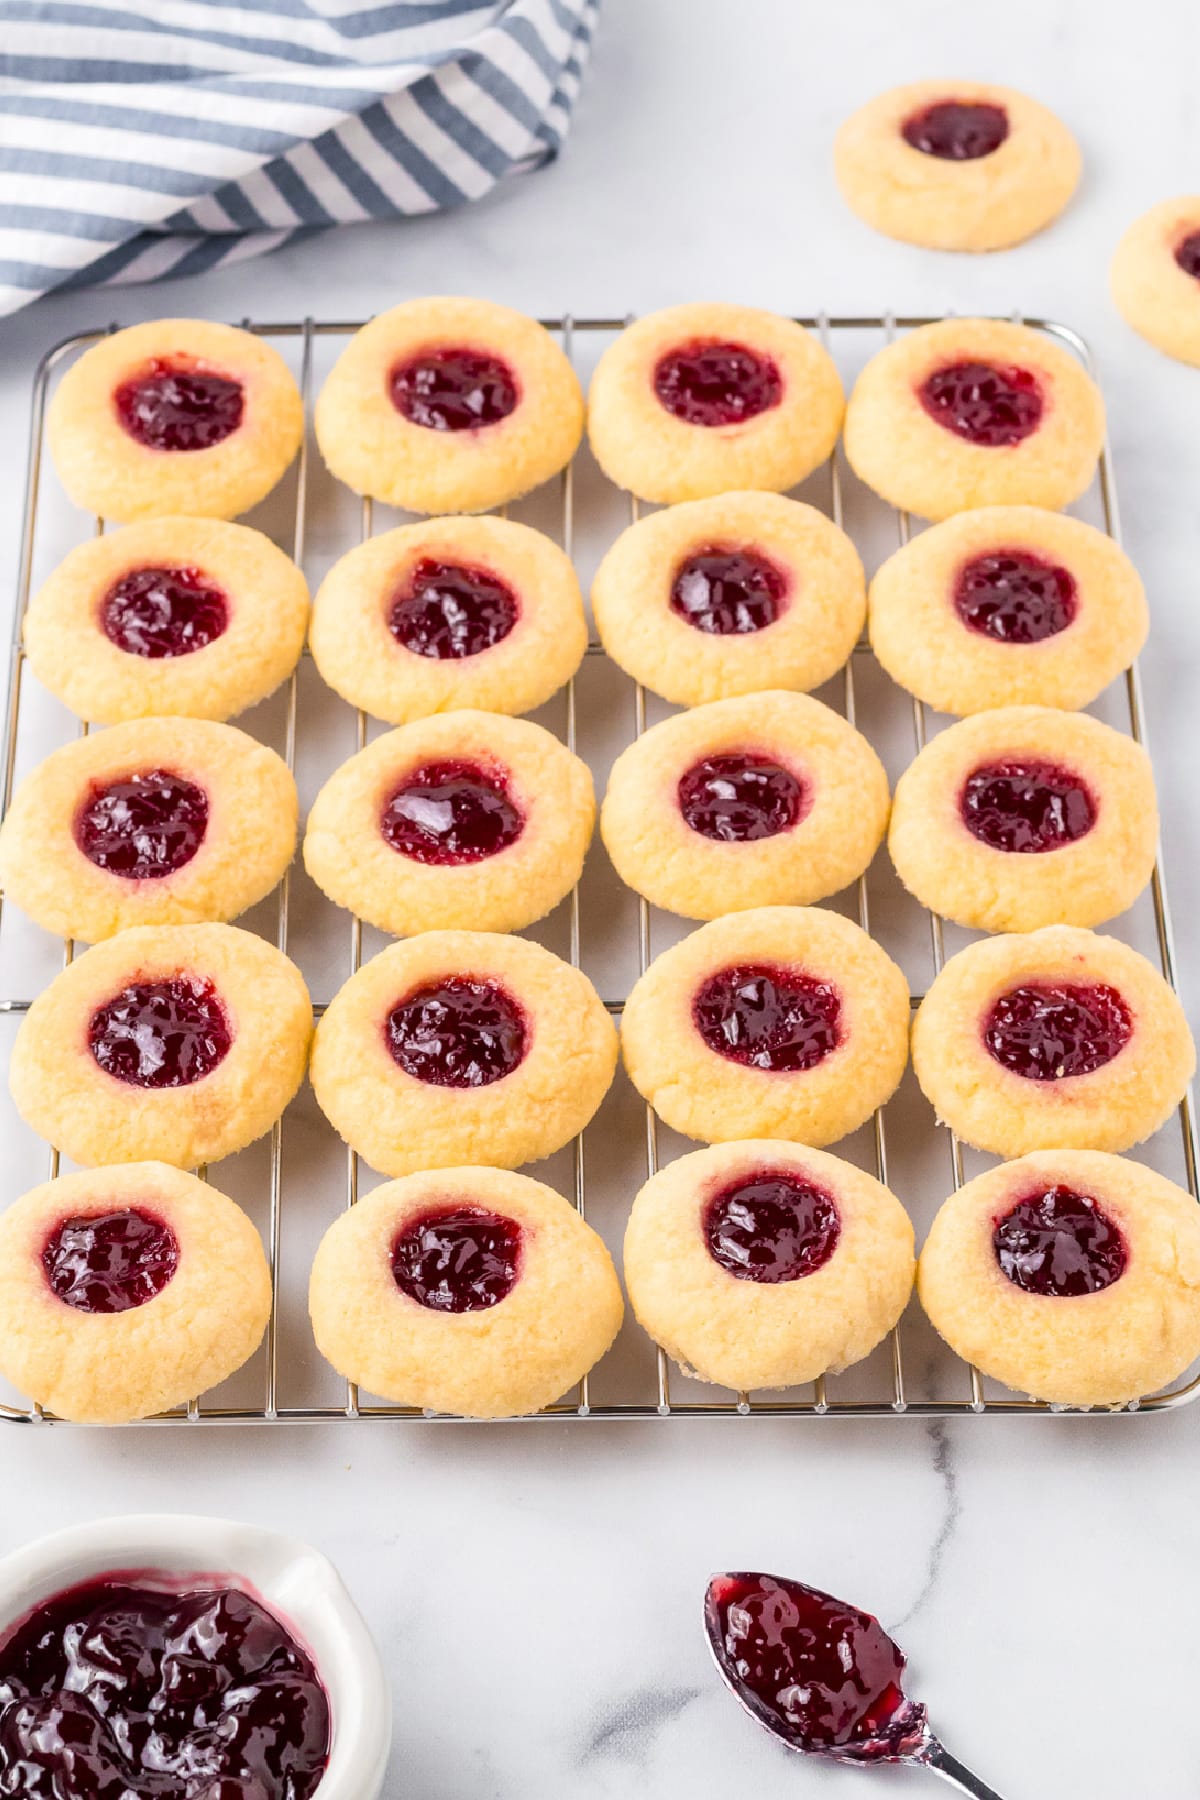 Raspberry jam thumbprint cookies in rows on a wire cooling rack with jam and a spoon dilled with jam on the counter nearby.